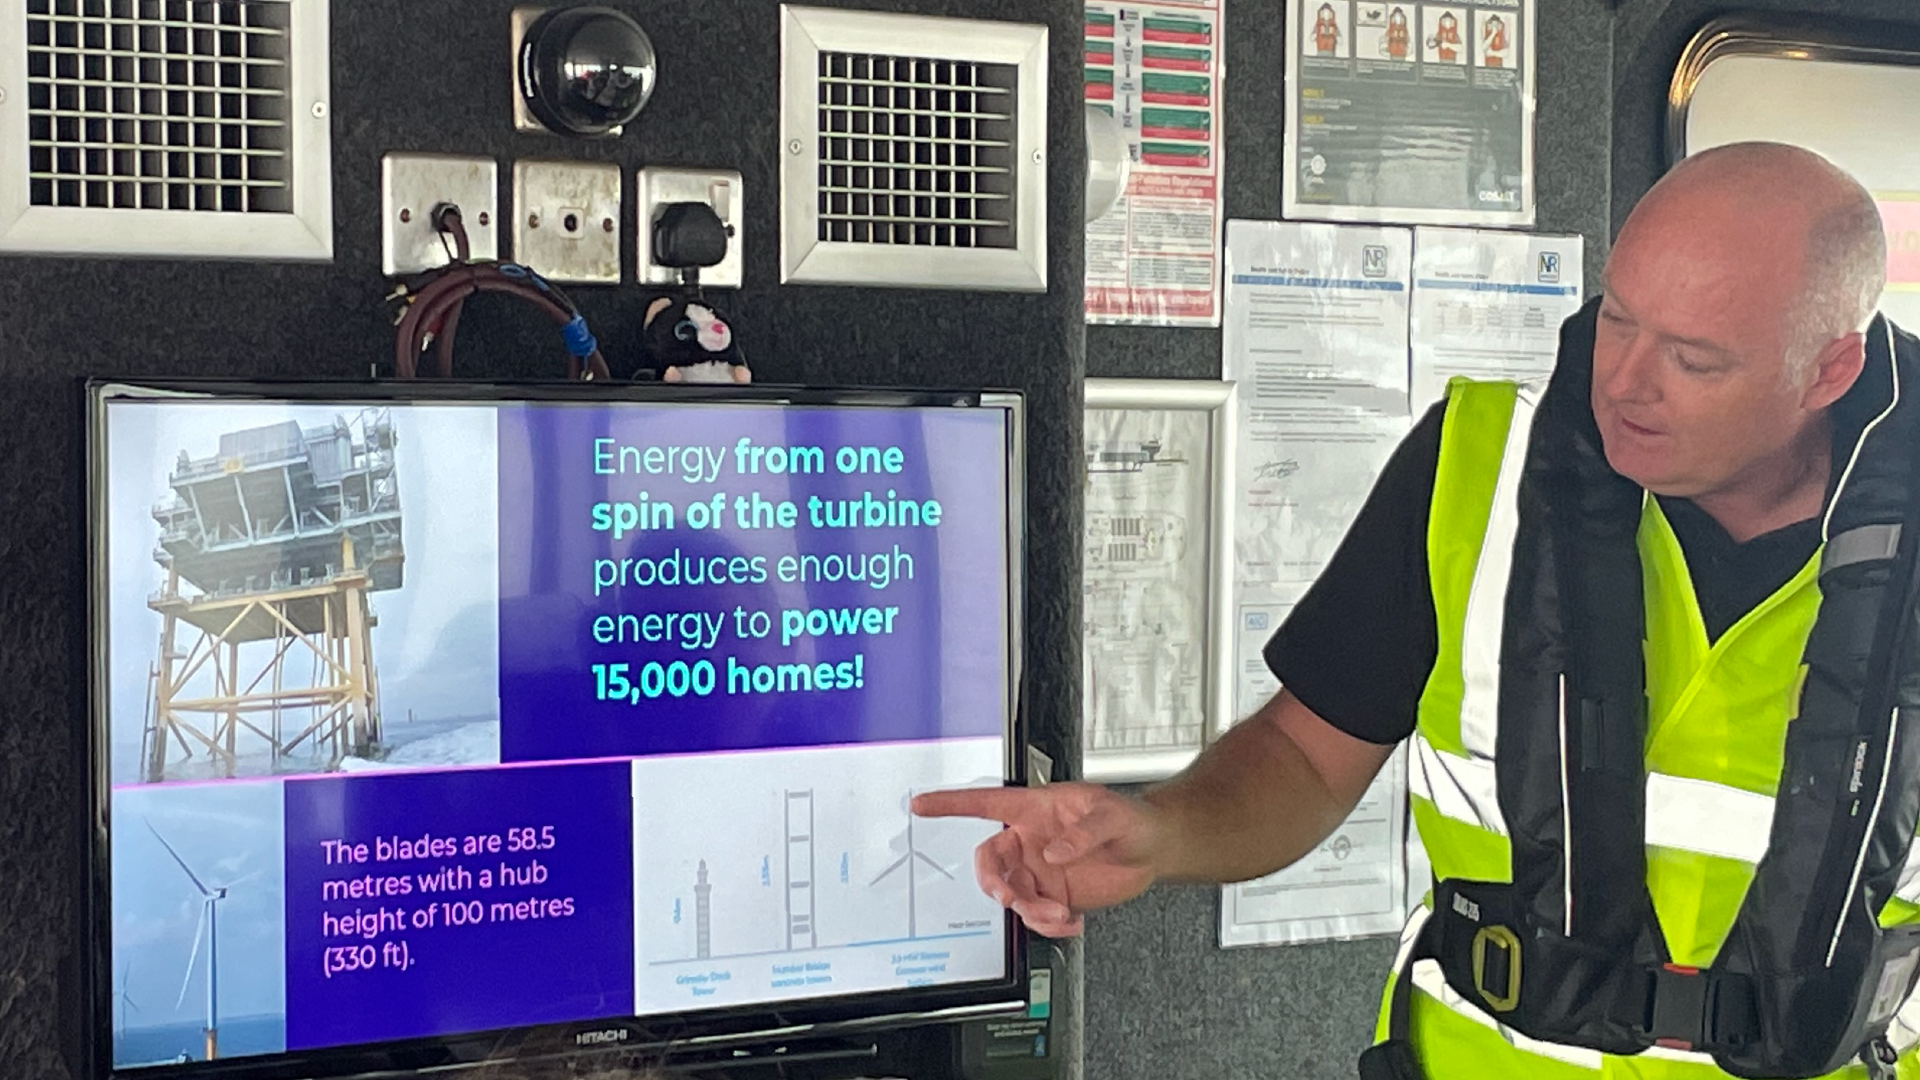 Worker at the wind farm explaining about how much energy is generated from the turbine spins